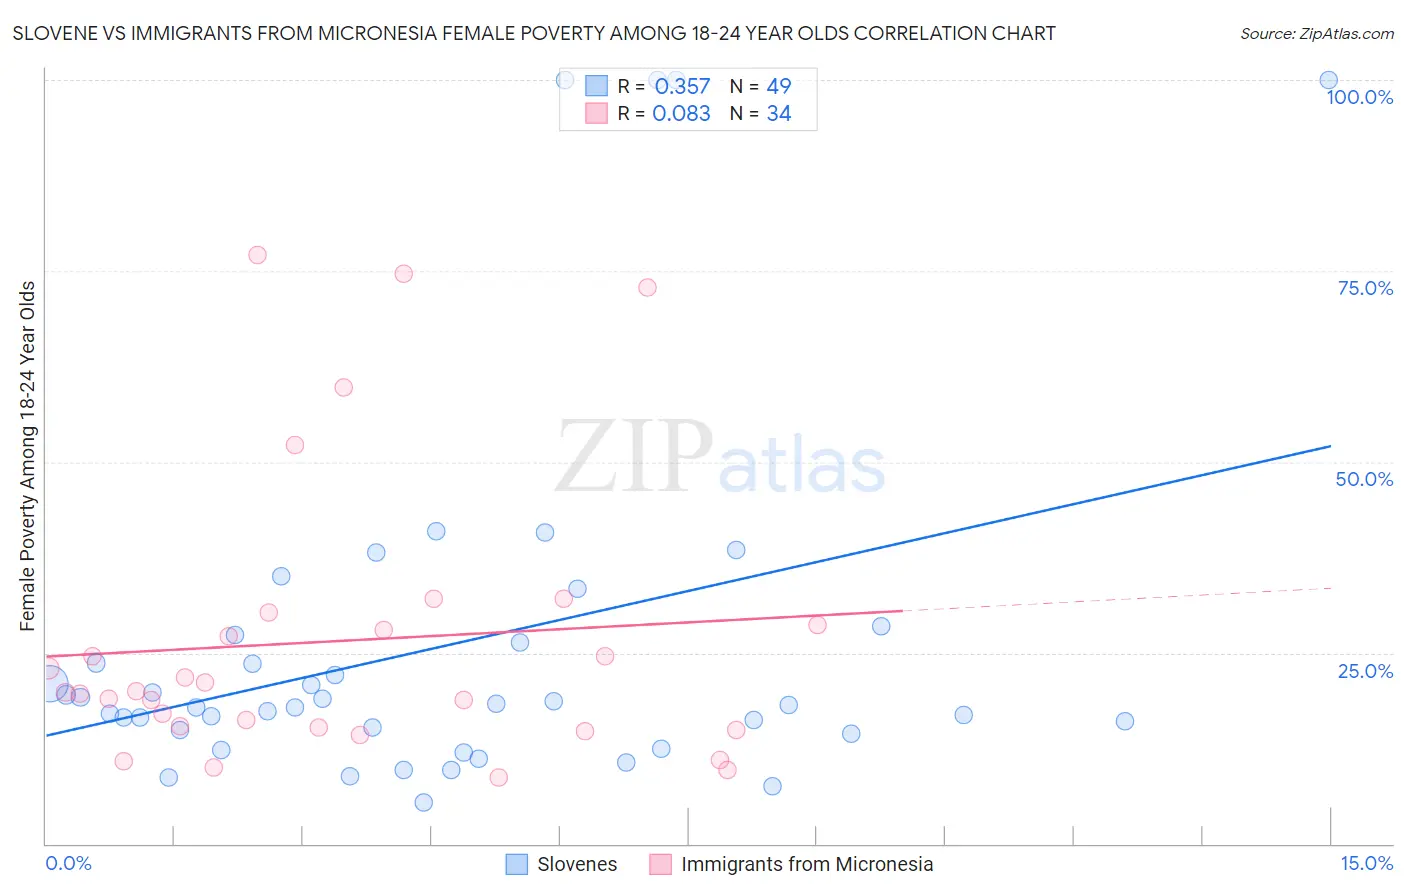 Slovene vs Immigrants from Micronesia Female Poverty Among 18-24 Year Olds